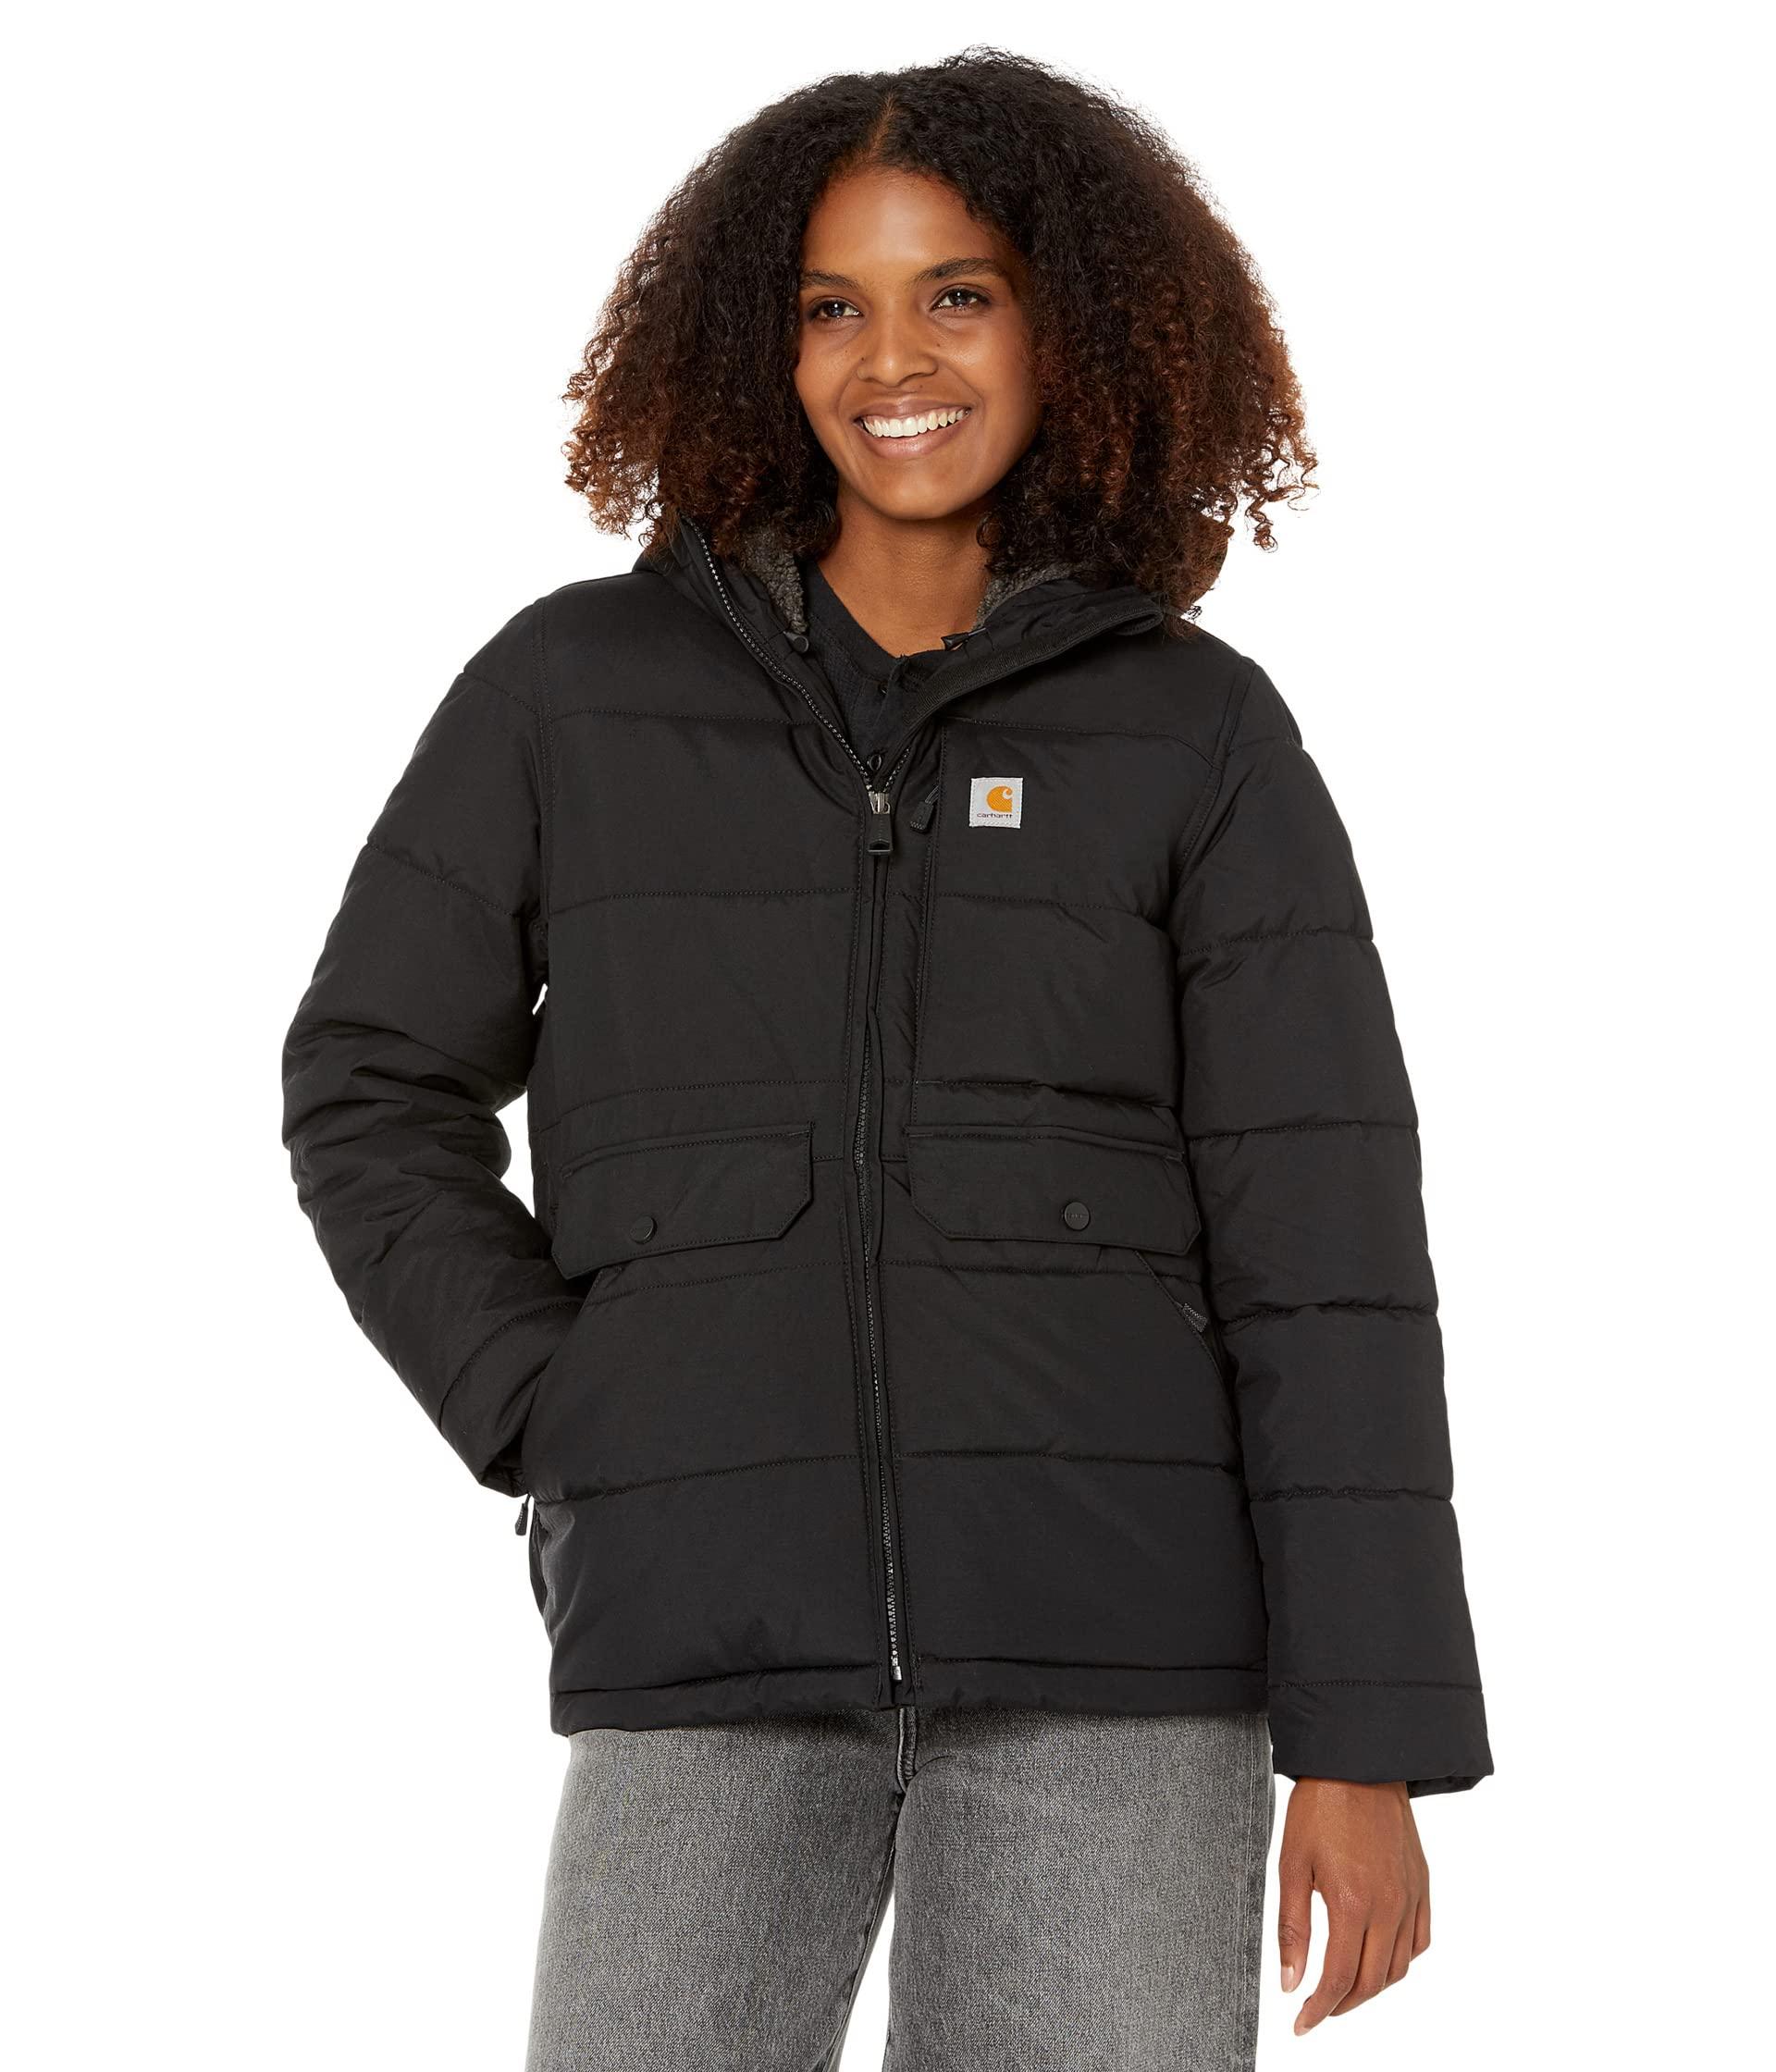 Carhartt Montana Relaxed Fit Midweight Insulated Jacket in Black | Lyst